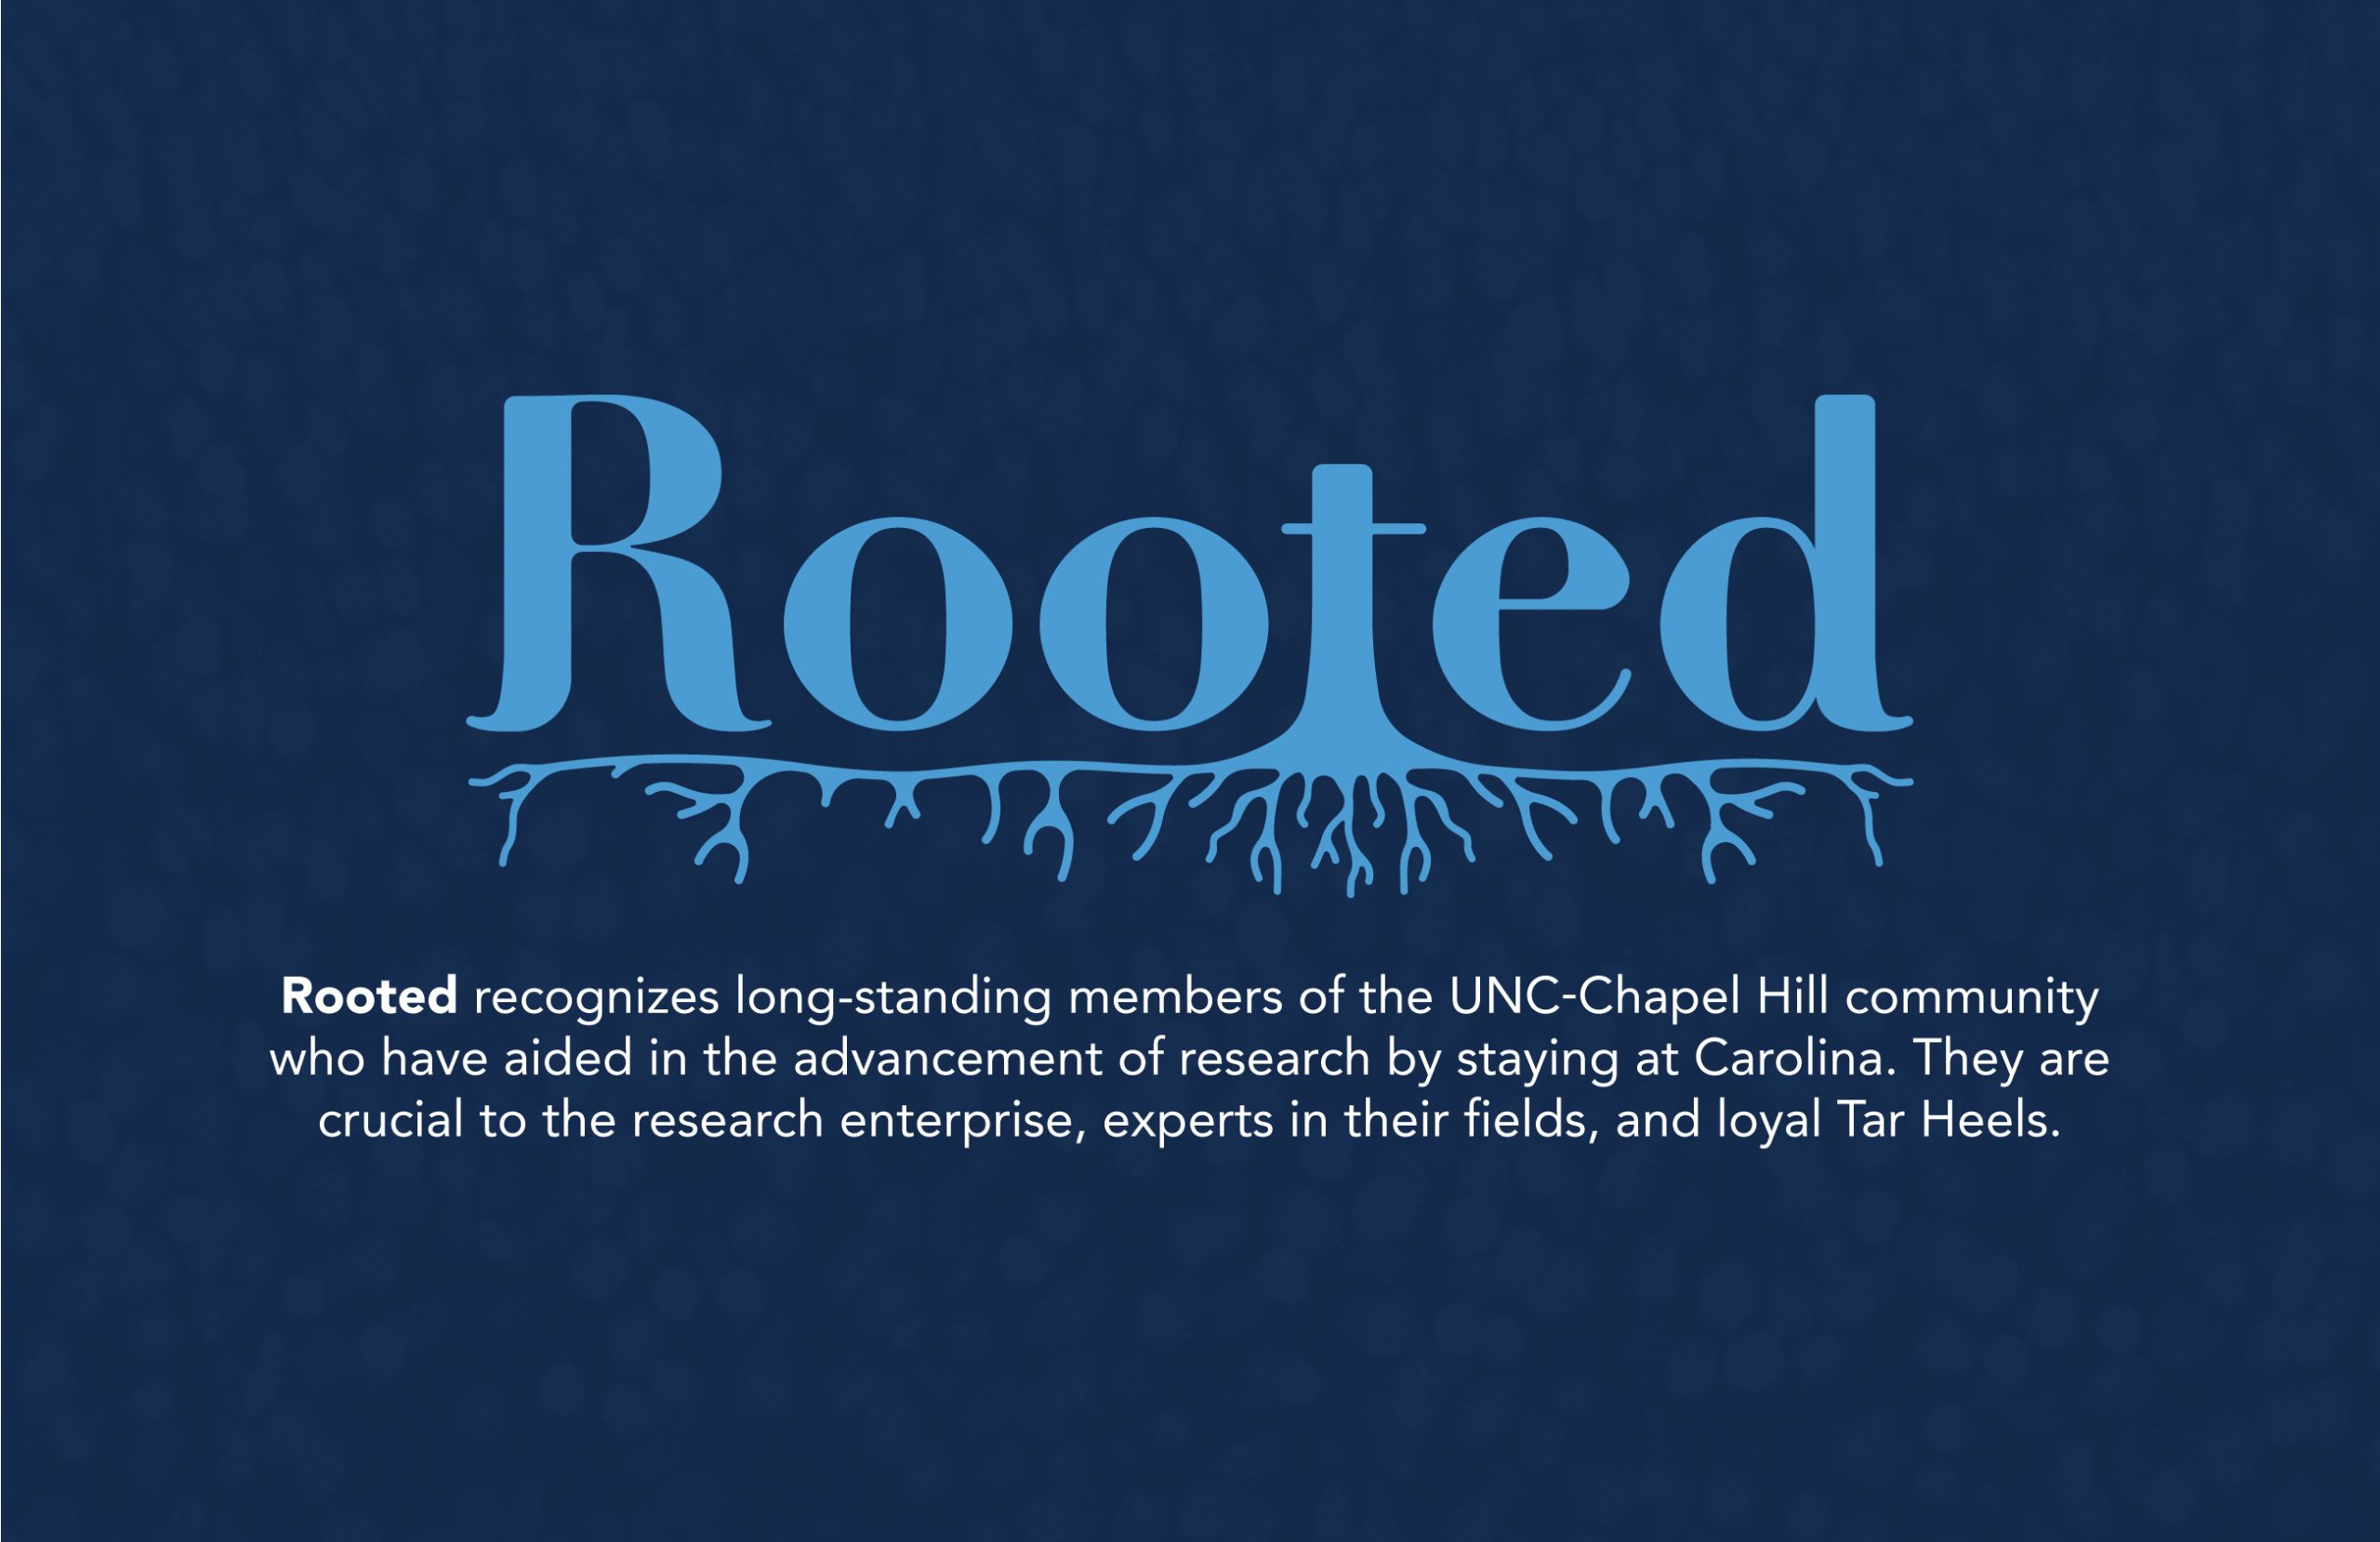 Banner highlighting the UNC Research series 'Rooted,' that reads 'Rooted recognizes long-standing members of the UNC-Chapel Hill community who have aided in the advancement of research by staying at Carolina. They are crucial to the research enterprise, experts in their fields, and loyal Tar Heels.' Click to read more.